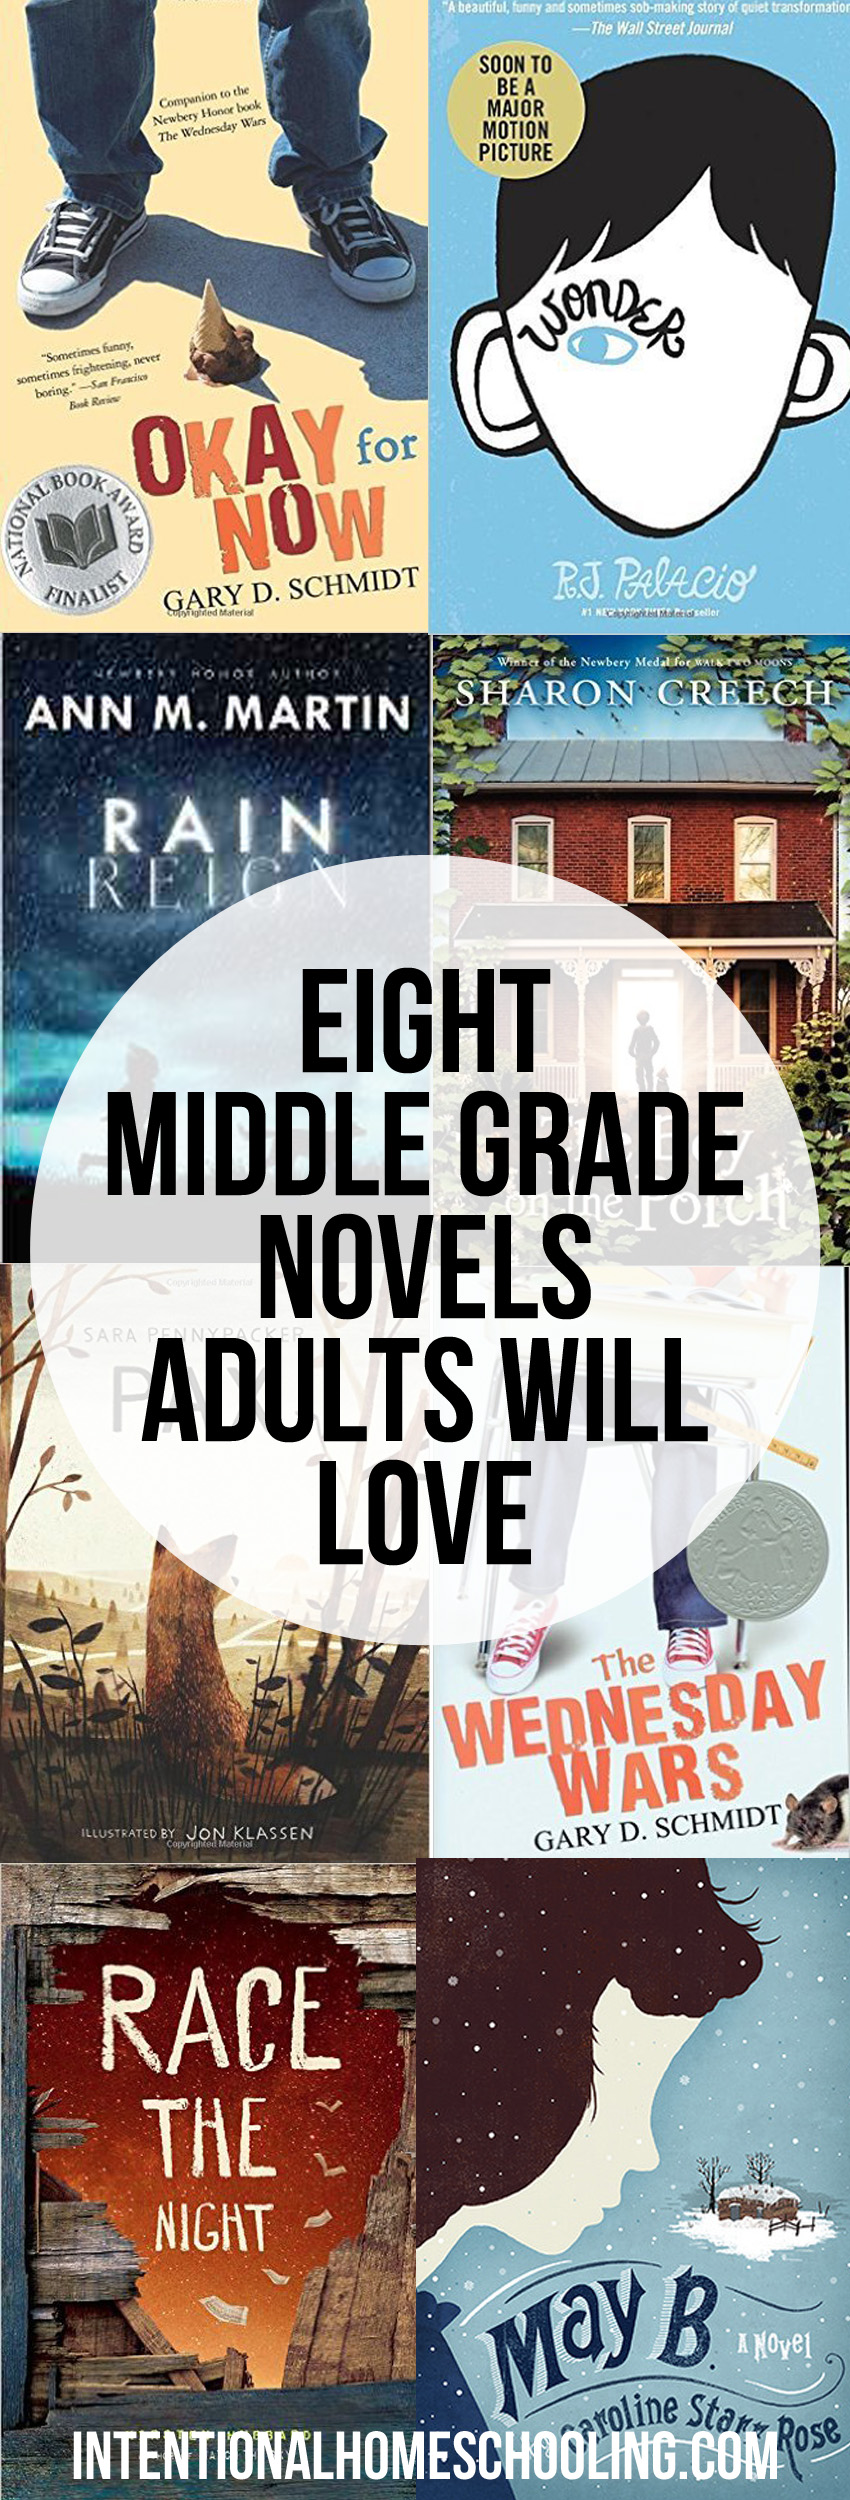 Middle Grade Novels Even Adults Will Love